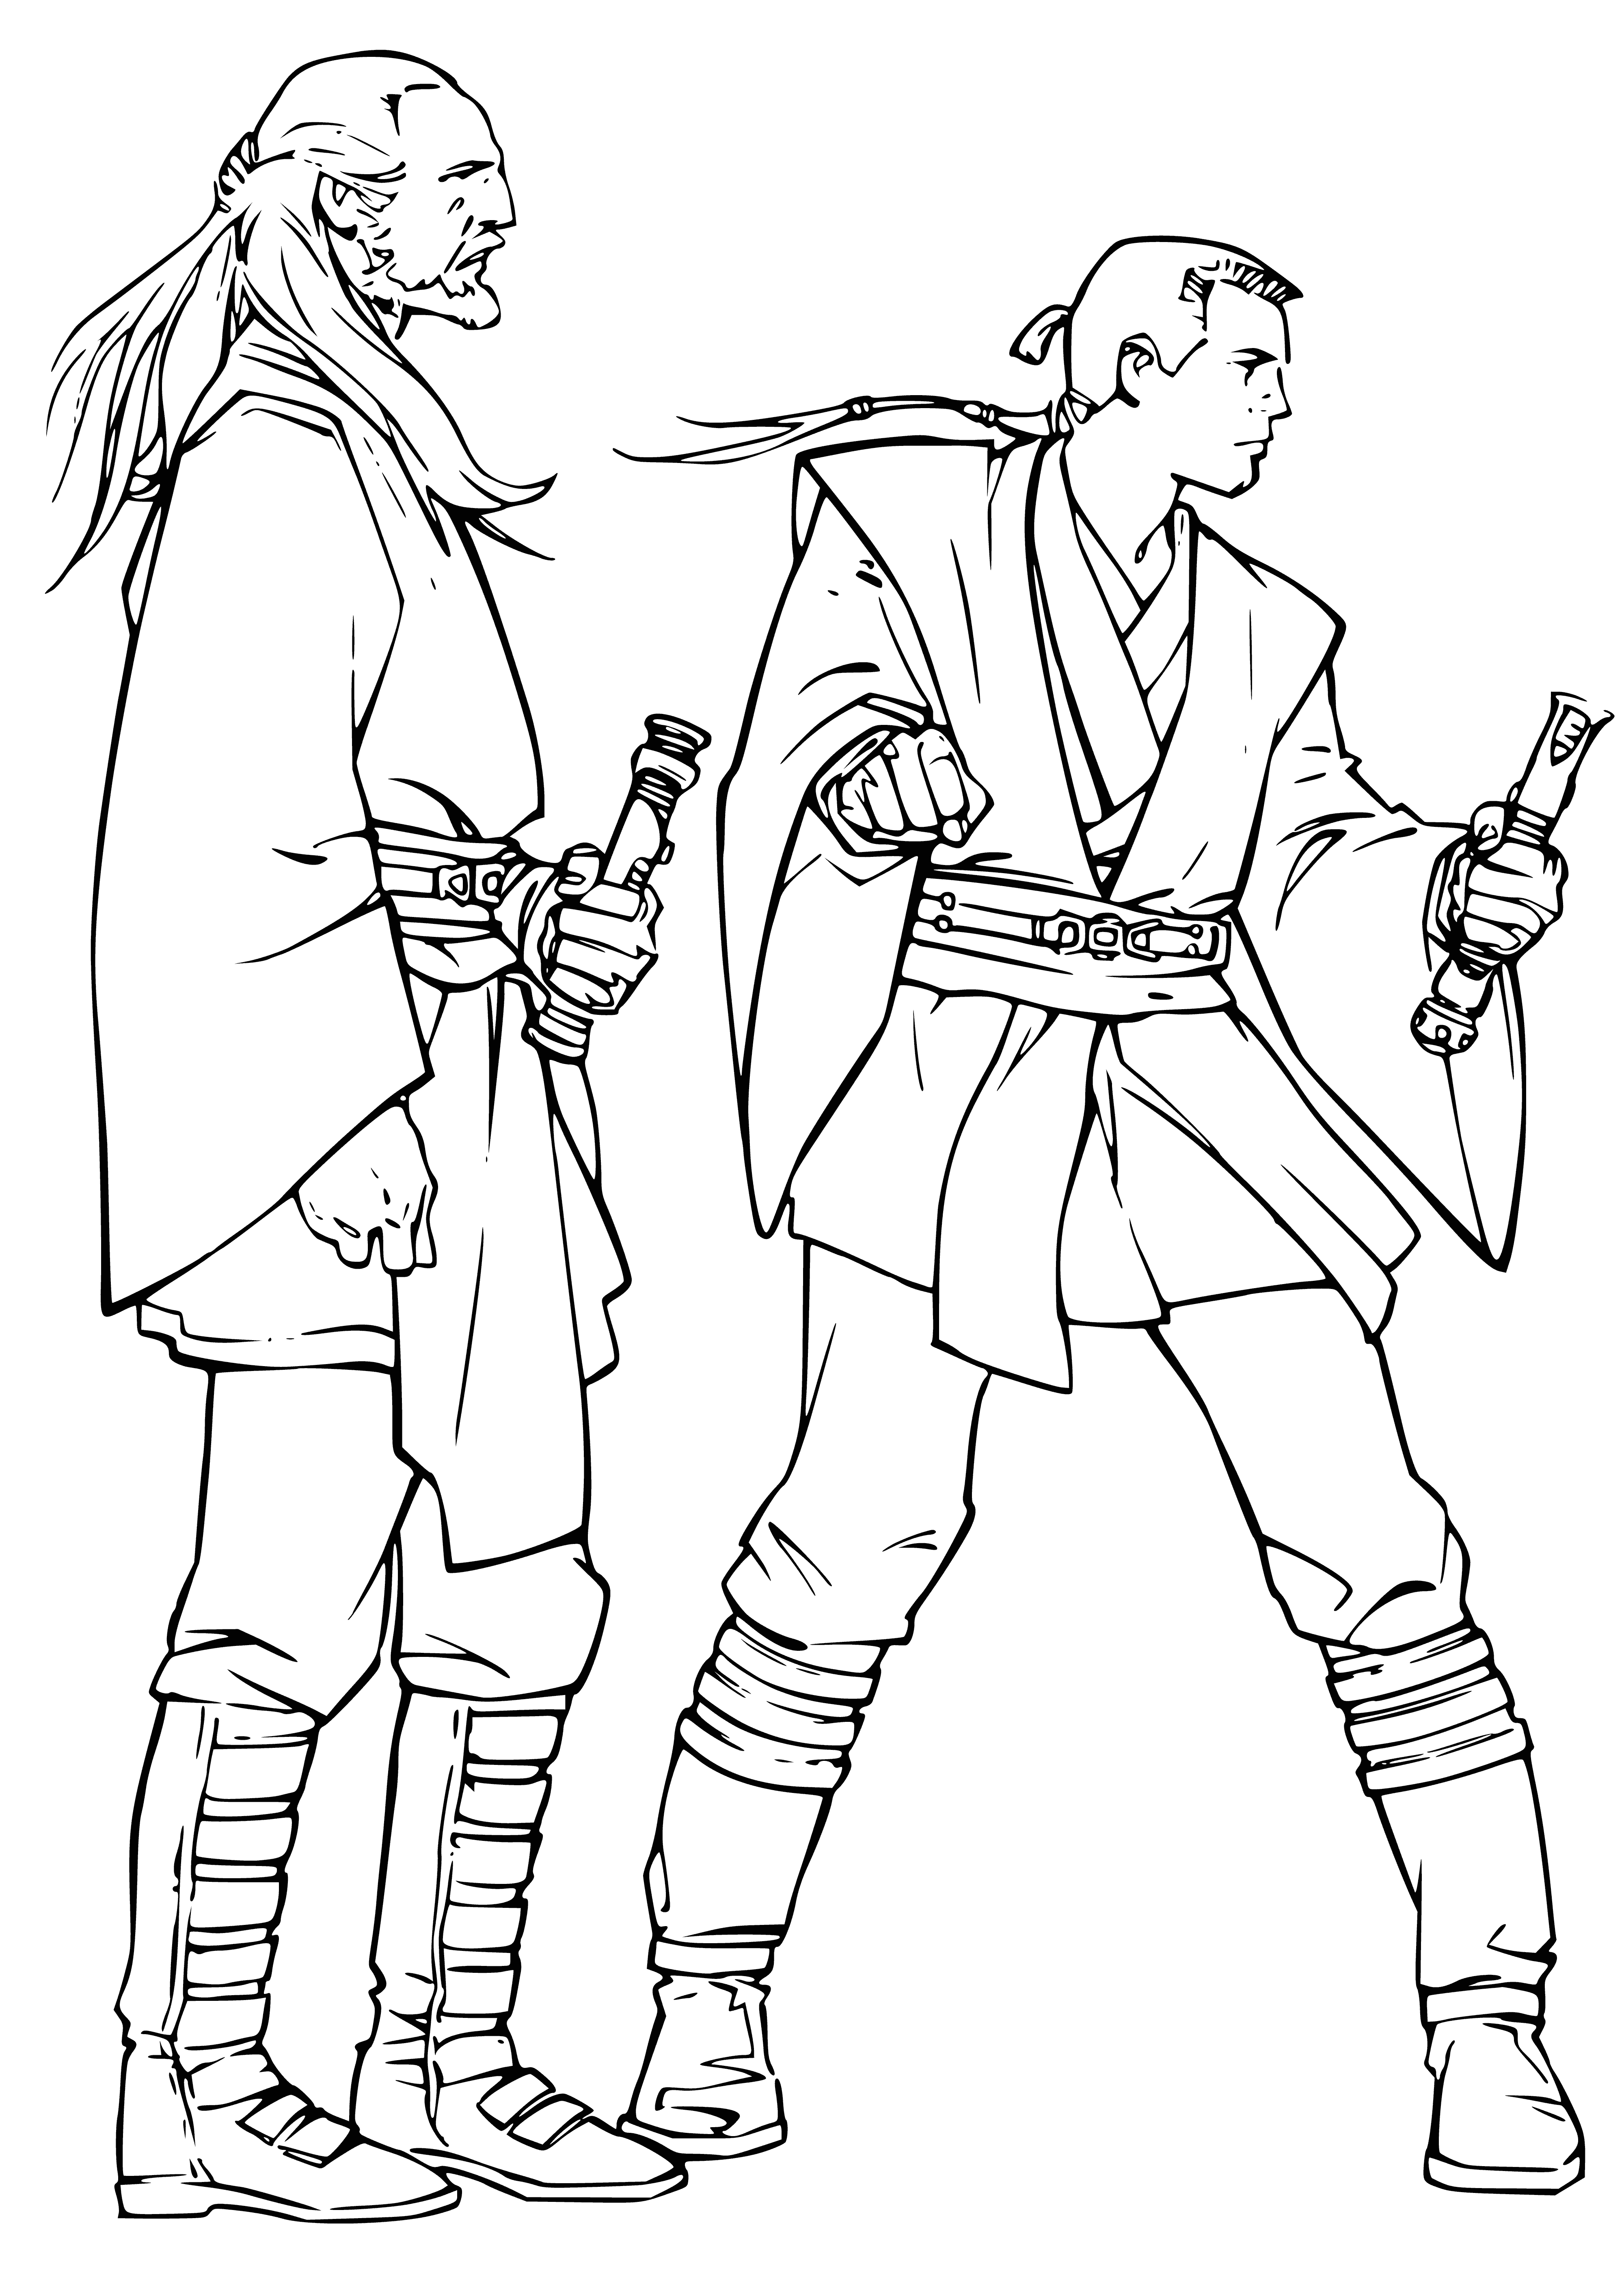 coloring page: Two men wearing white and brown, holding lightsabers - Darth Maul - are in the coloring page.